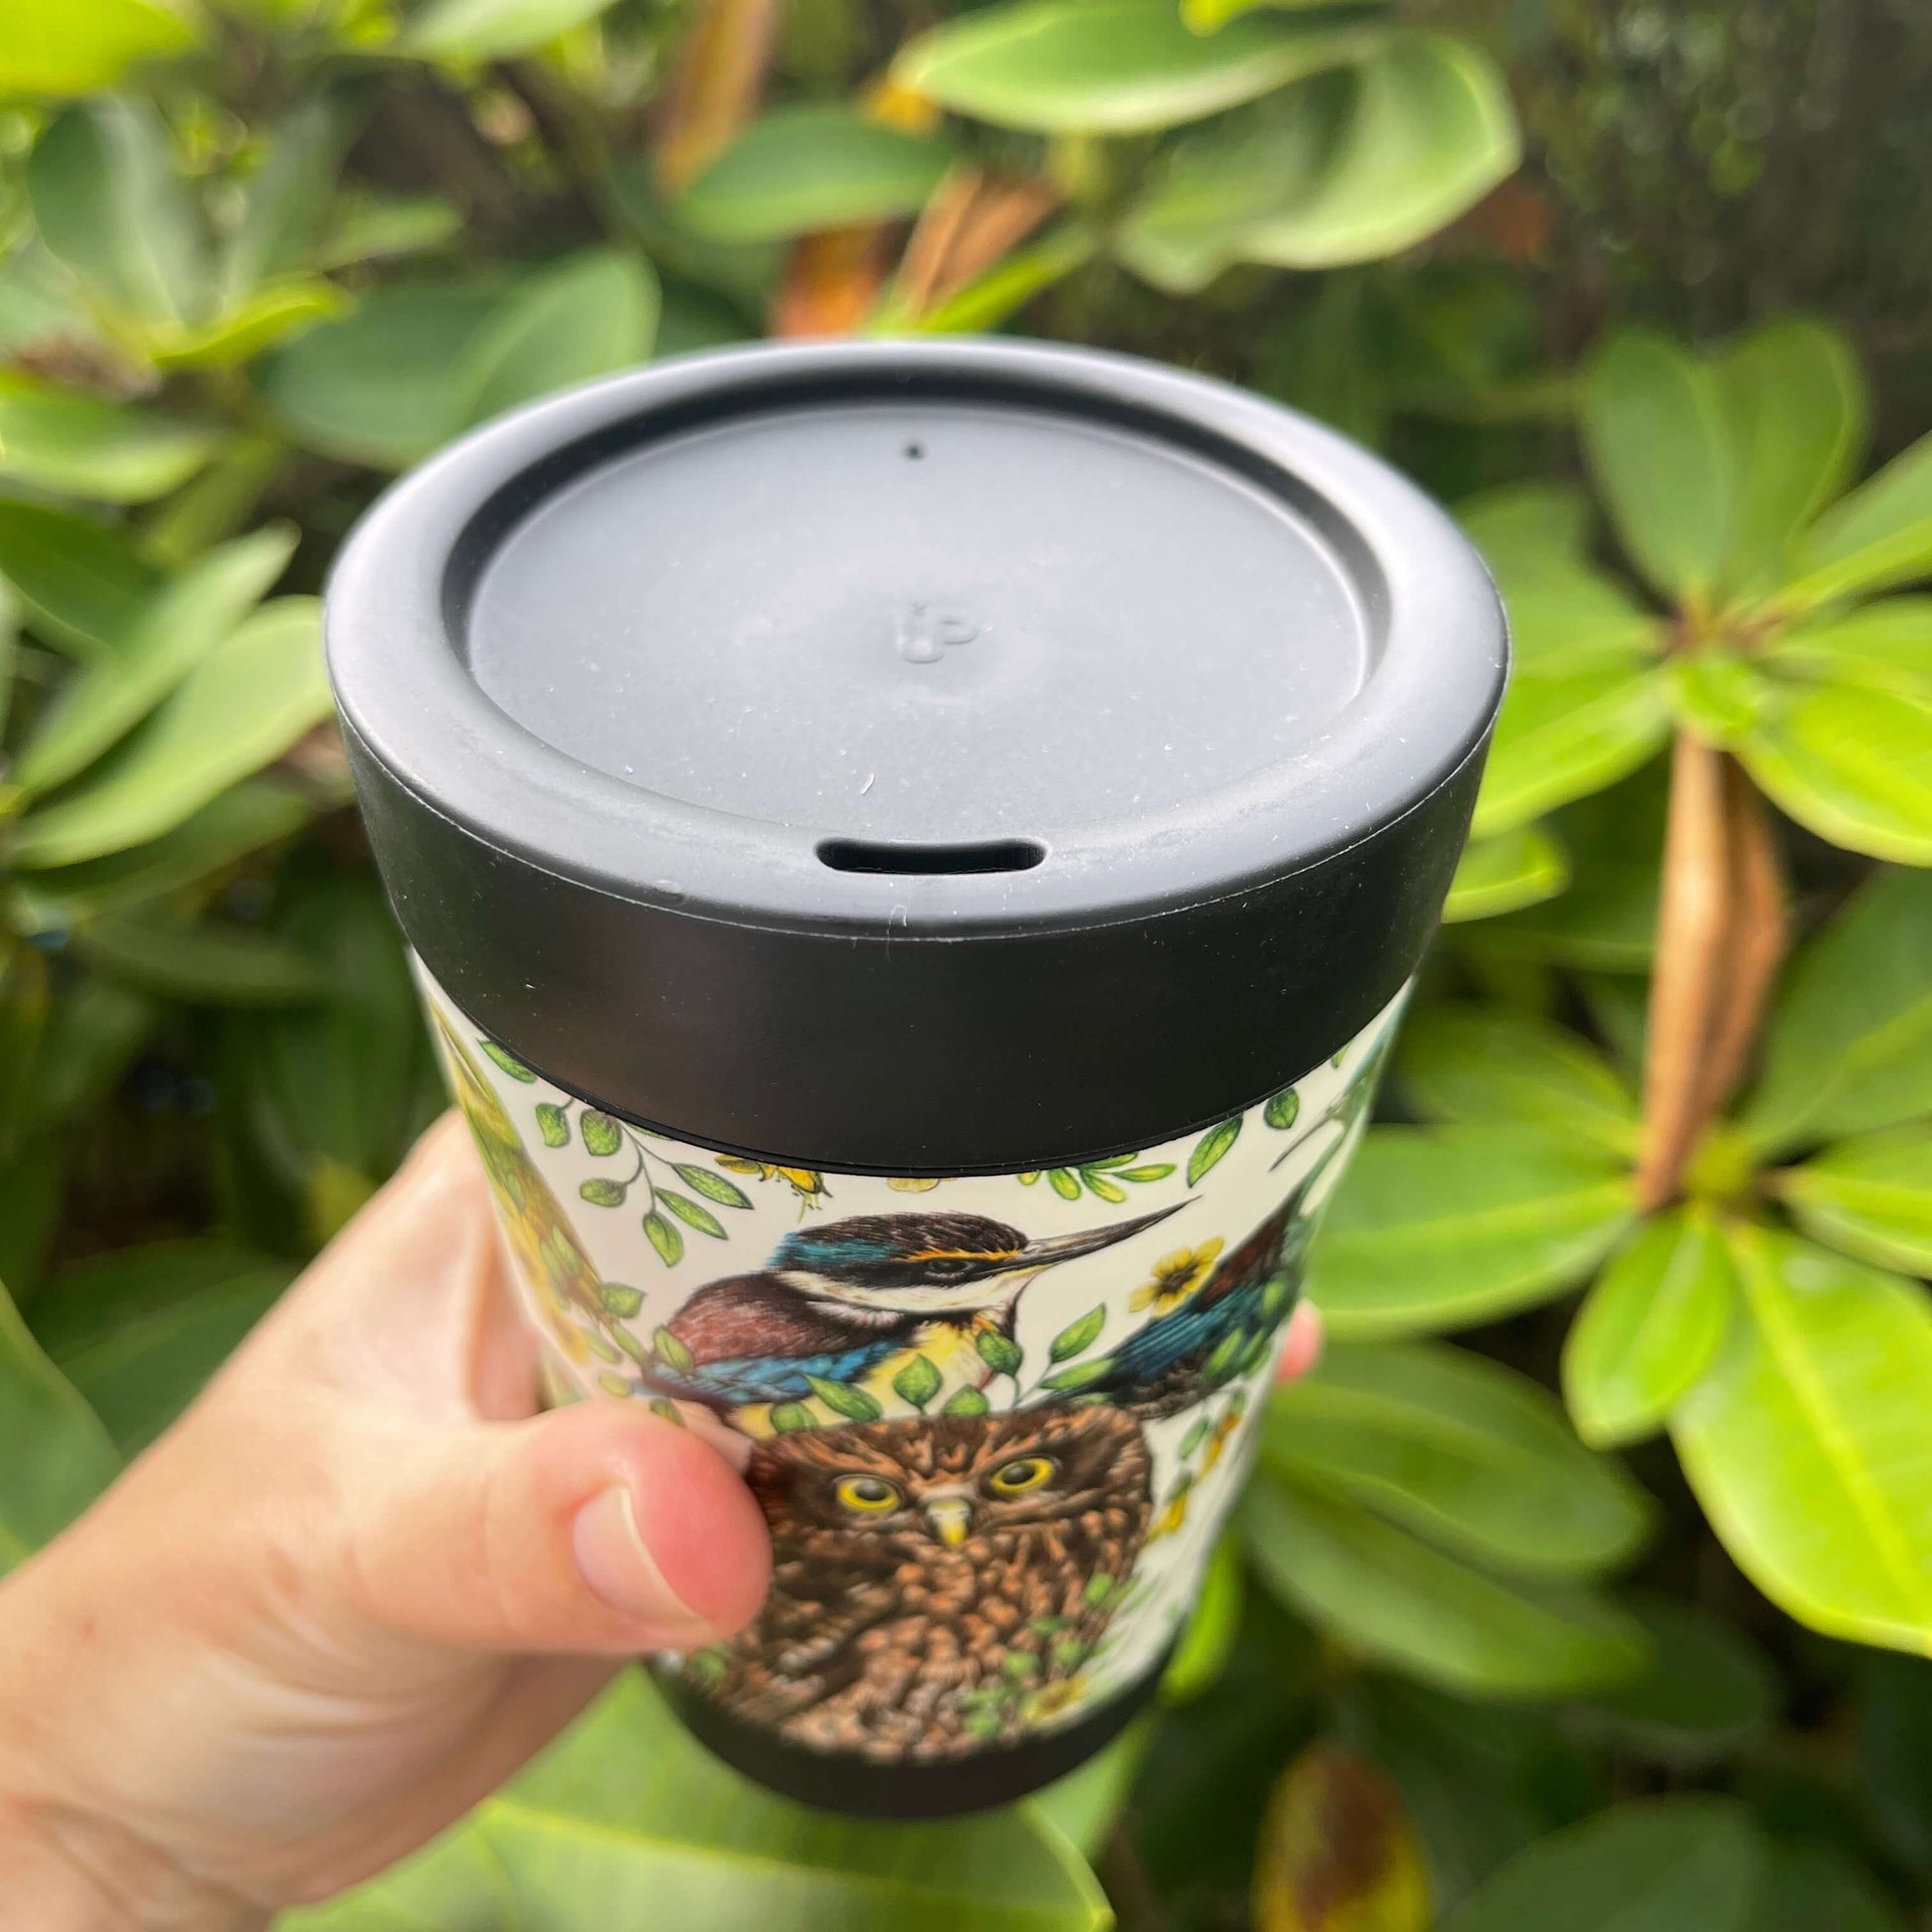 Black reusable coffee cup wrapped with beautiful drawings of New Zealand birds showing the lid with the sipper hole.